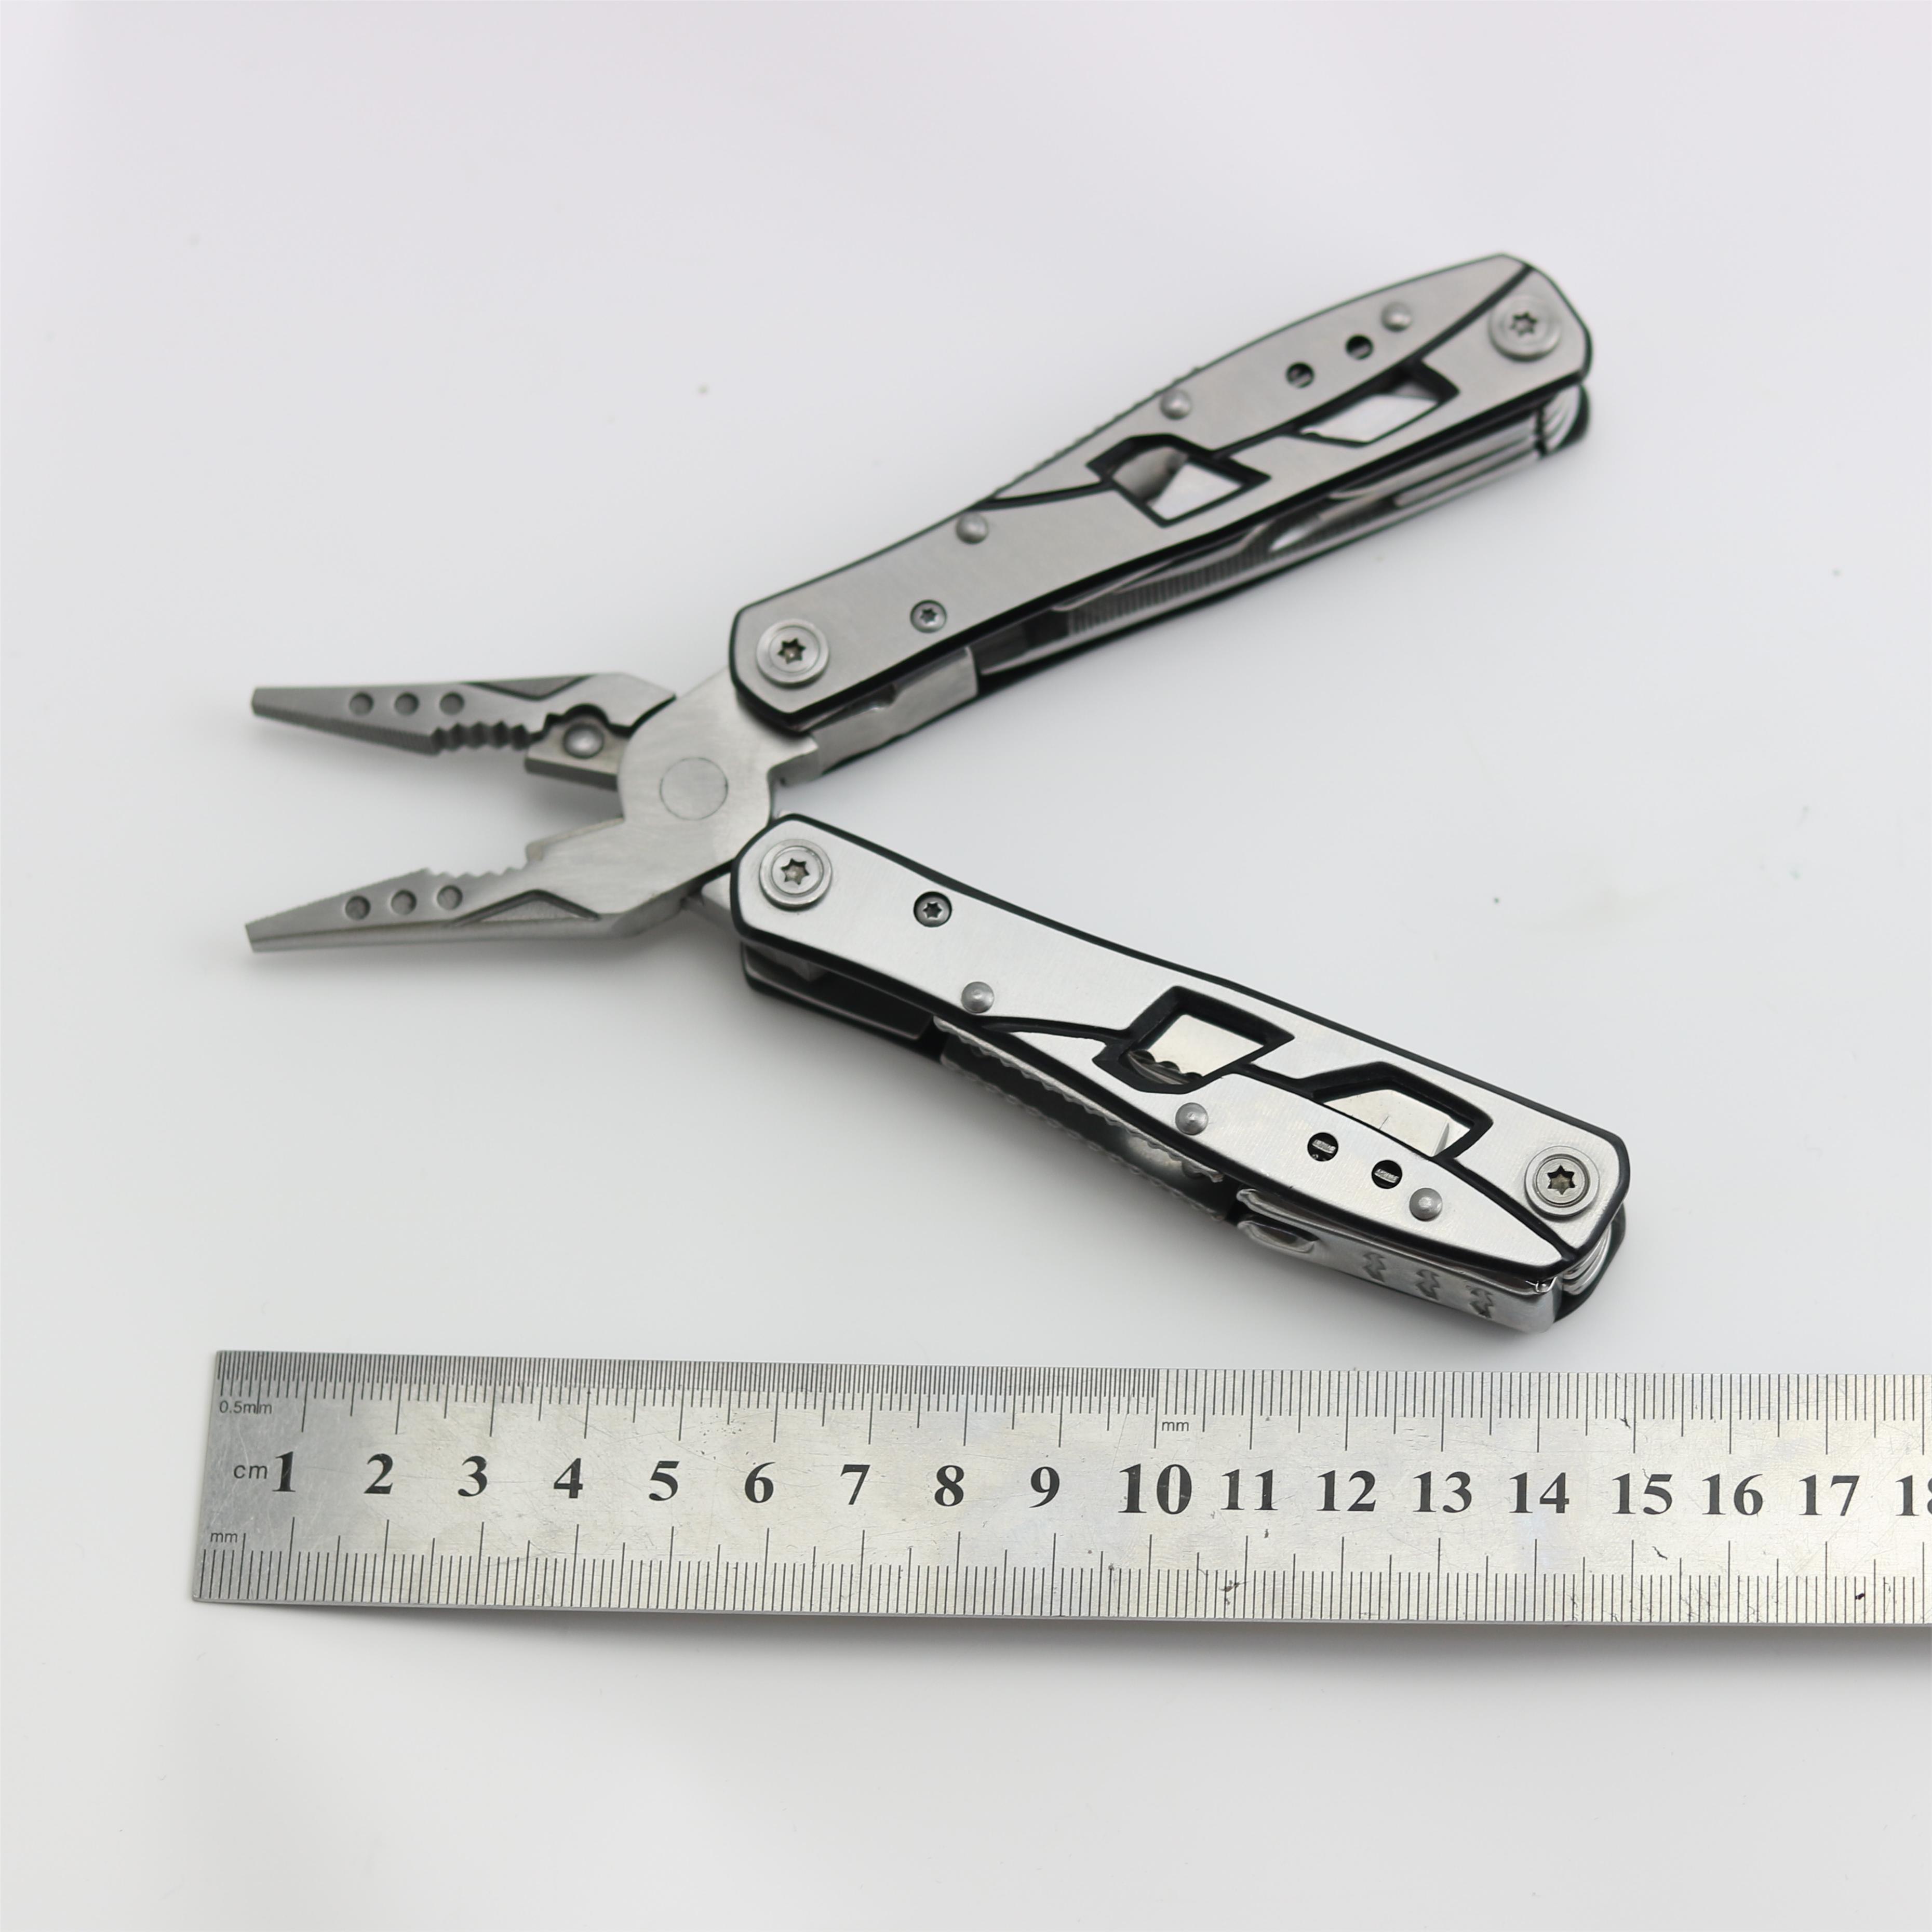 Outdoor folding multi tool pliers Blade multi-functional outdoor camping integrated convenient pliers tool